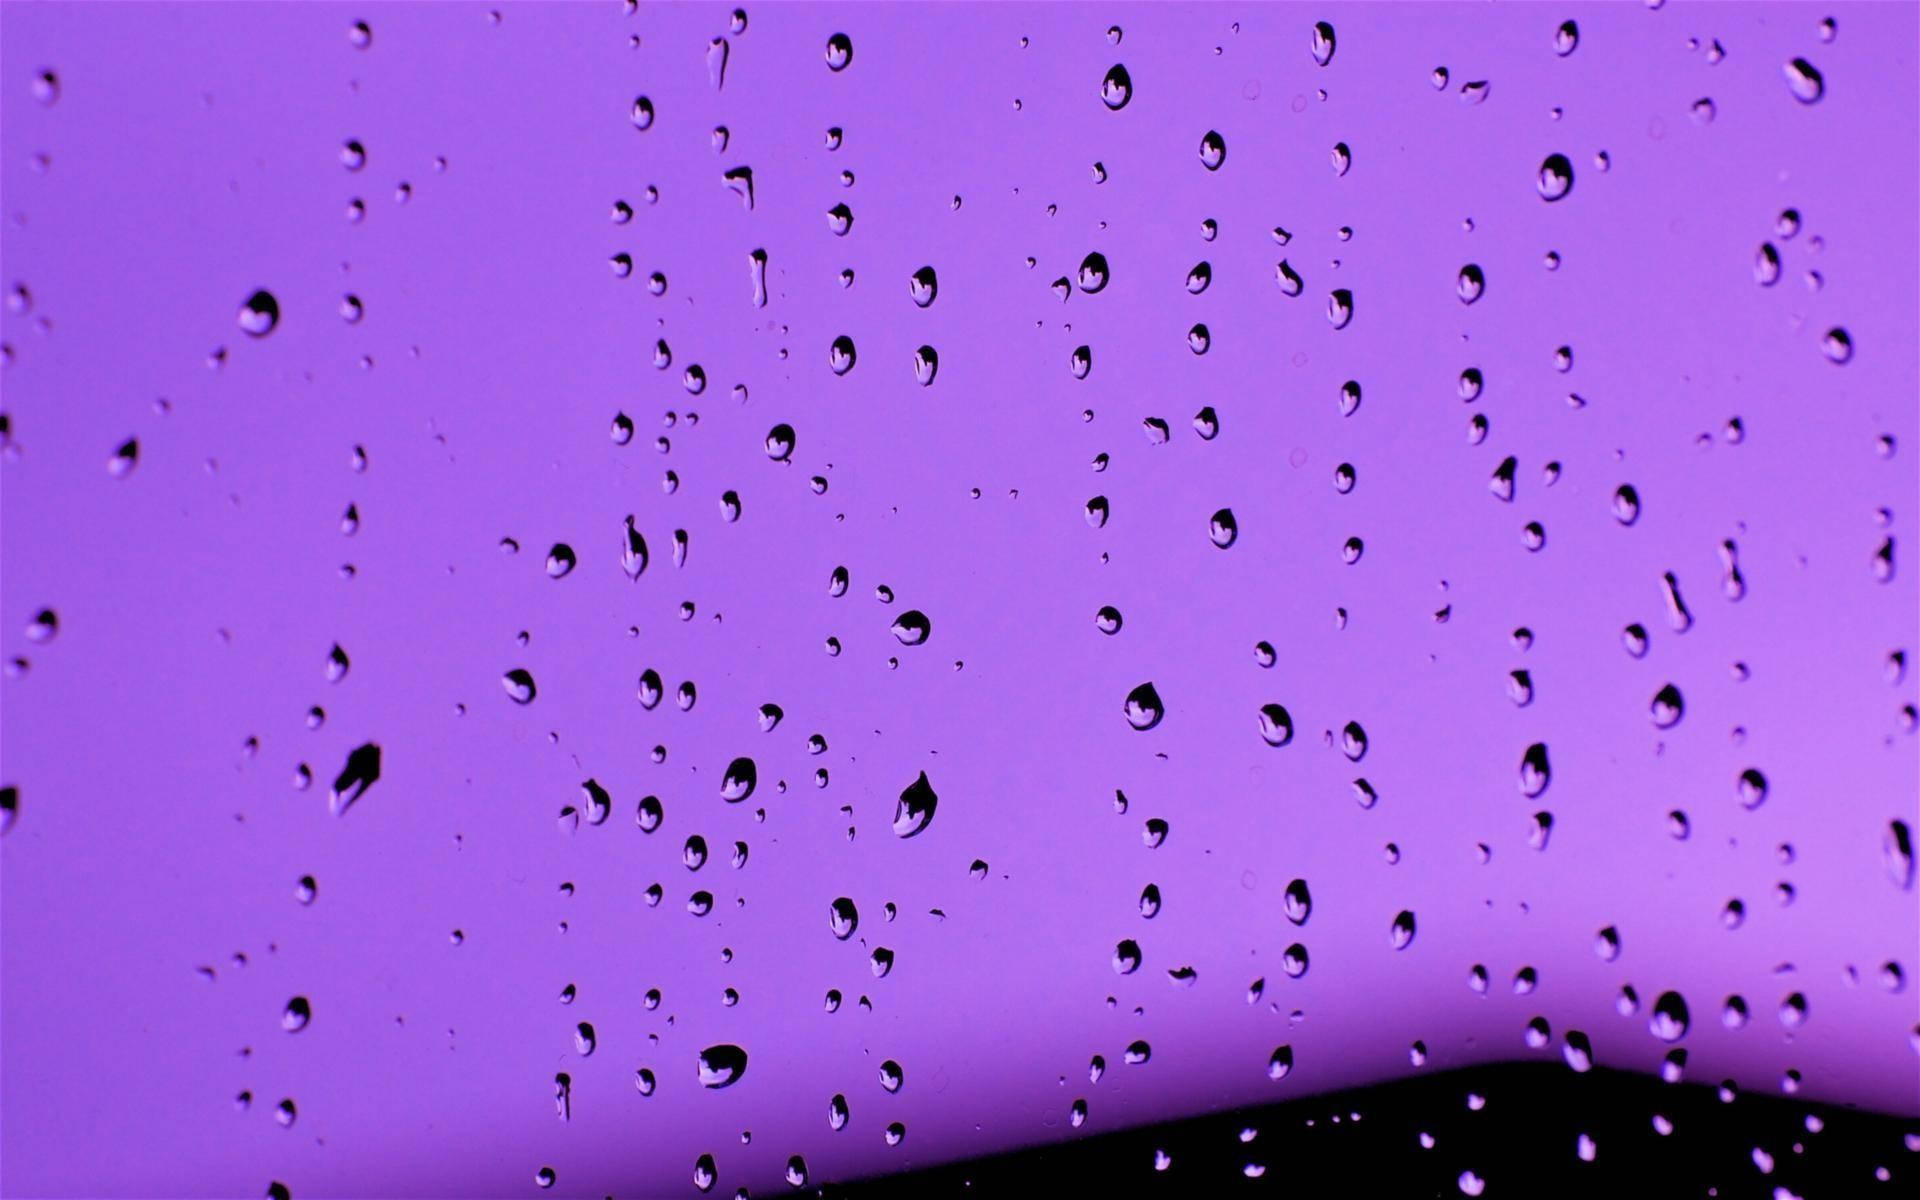 Droplets On Window With Light Purple Grading Background